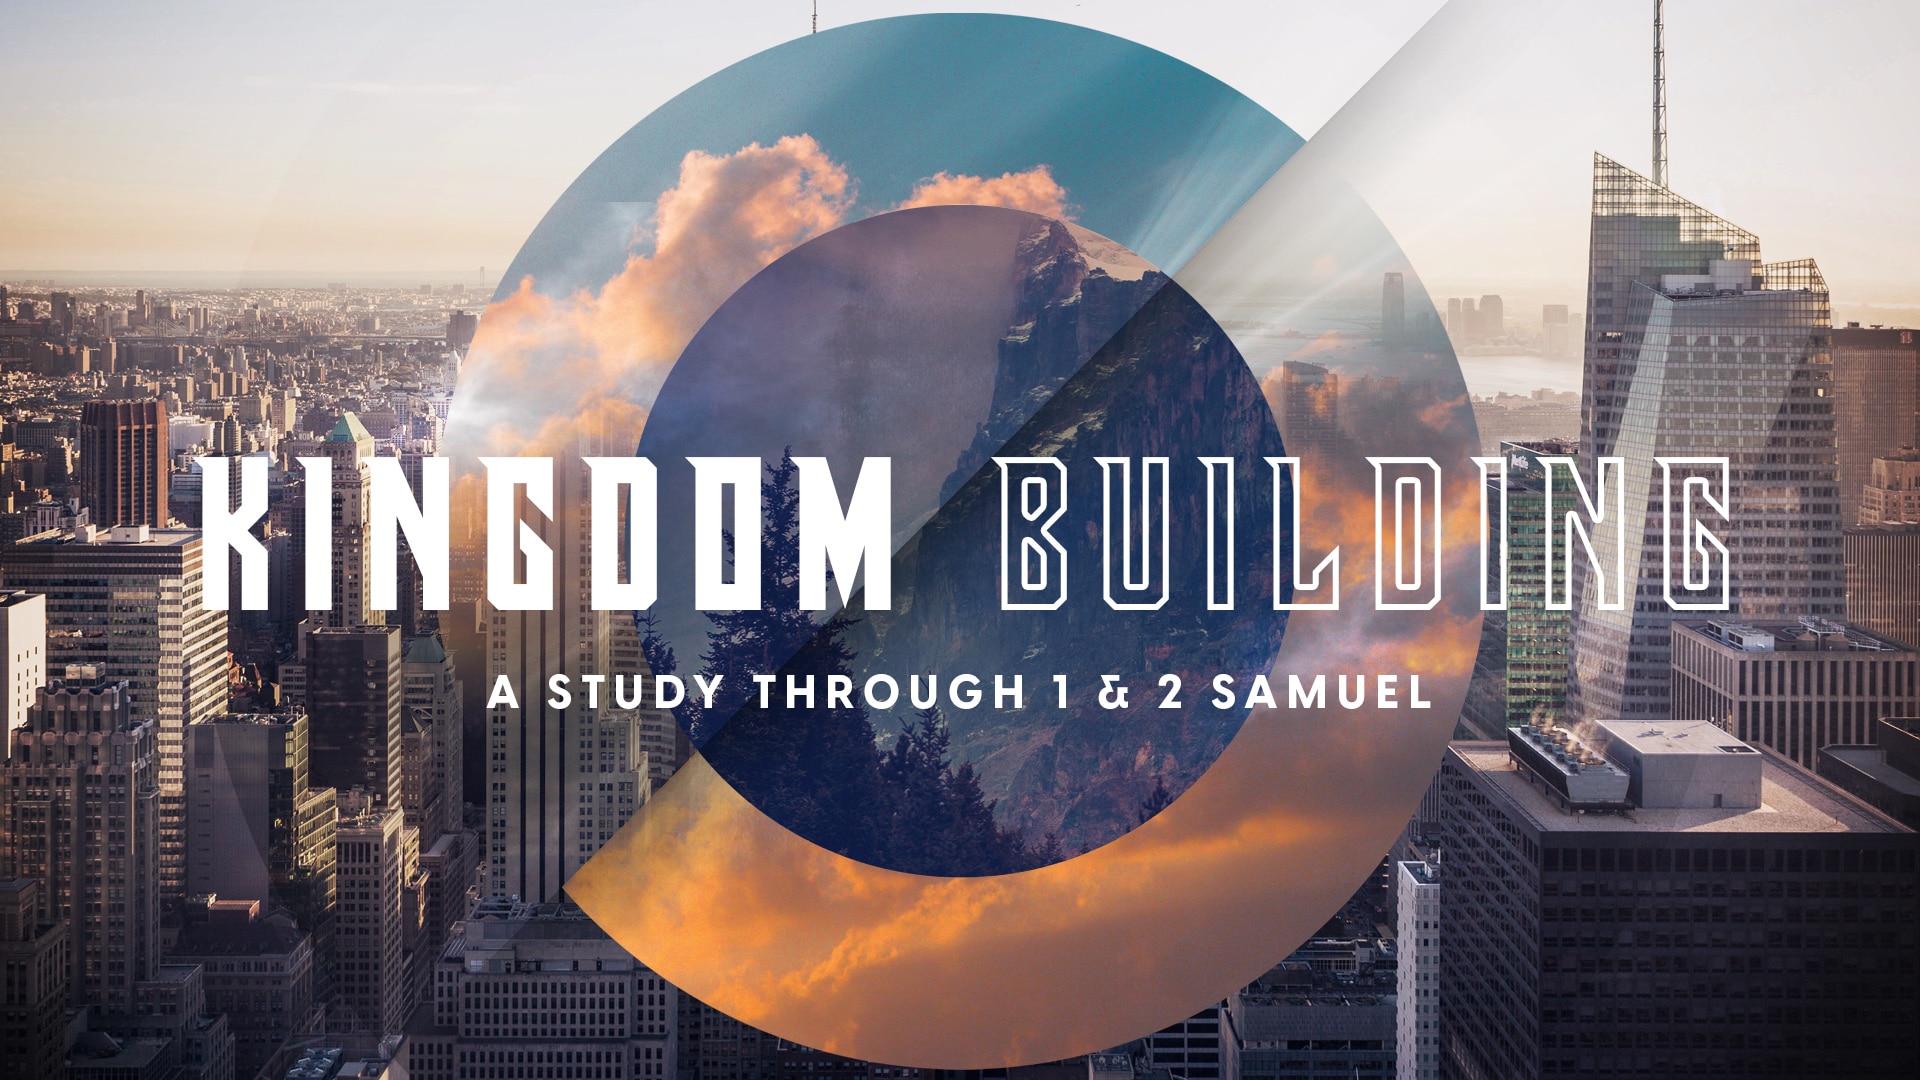 2 Samuel 22: In the End - Worship (Kingdom Building) Image